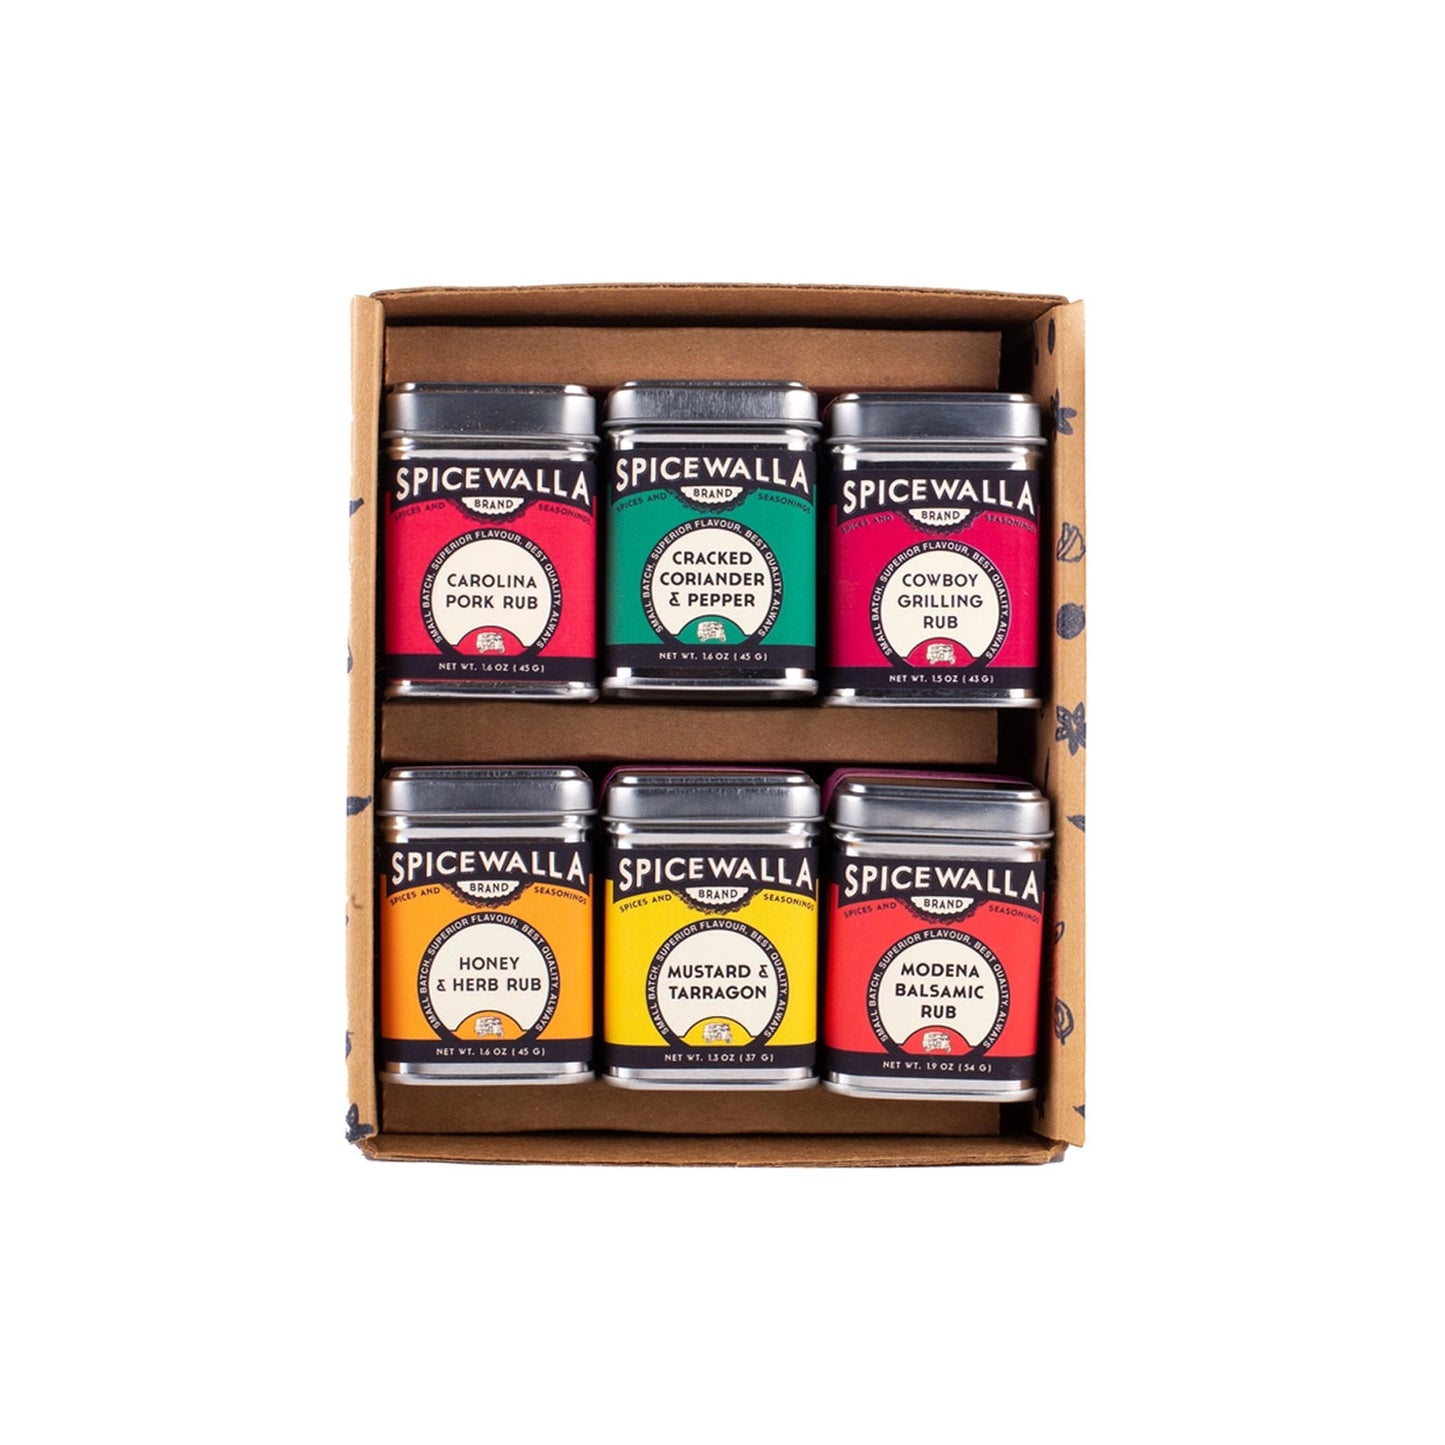 Grill & Roast Spice Gift Set